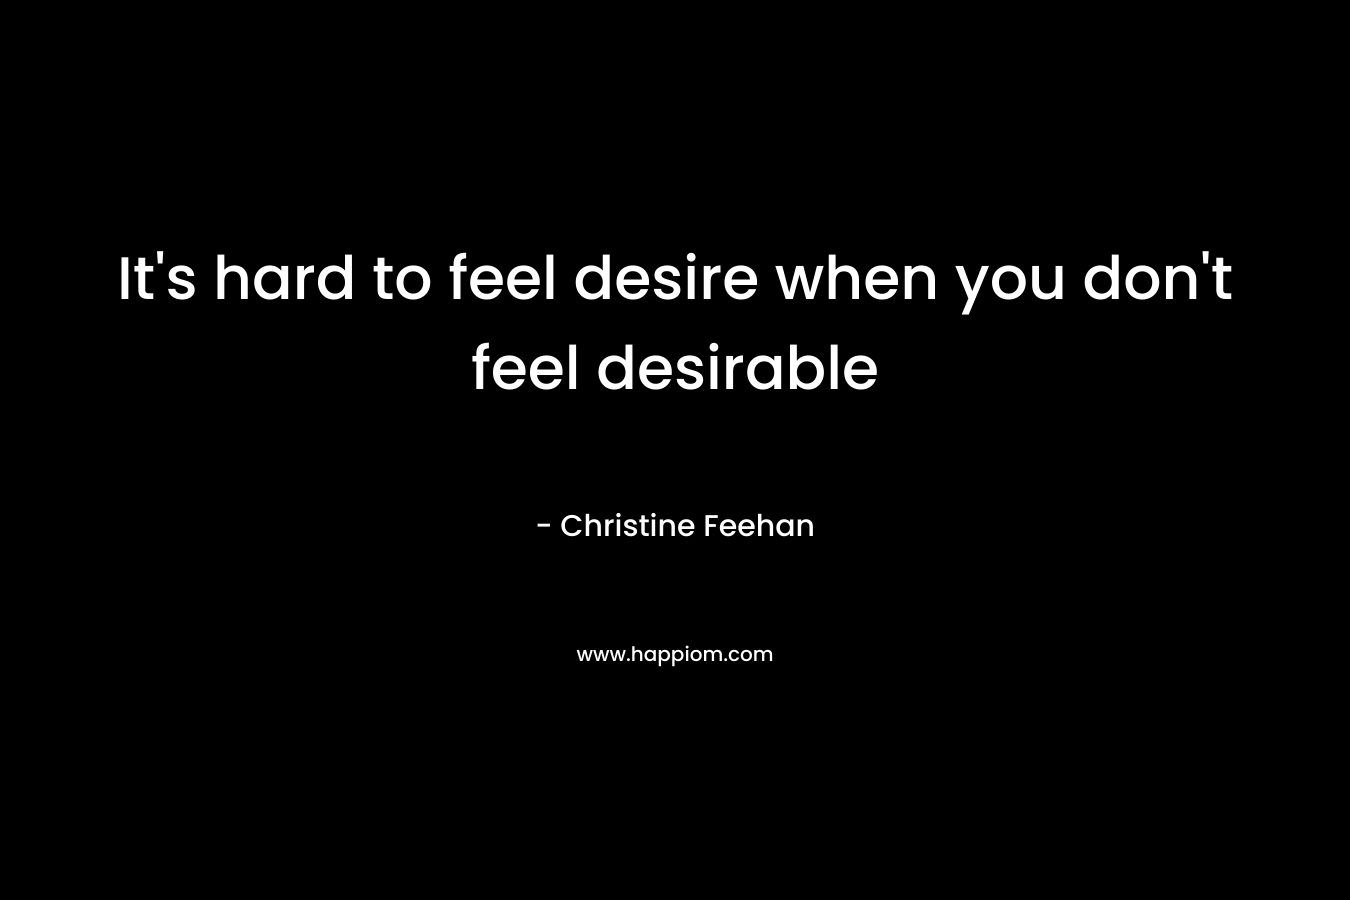 It's hard to feel desire when you don't feel desirable